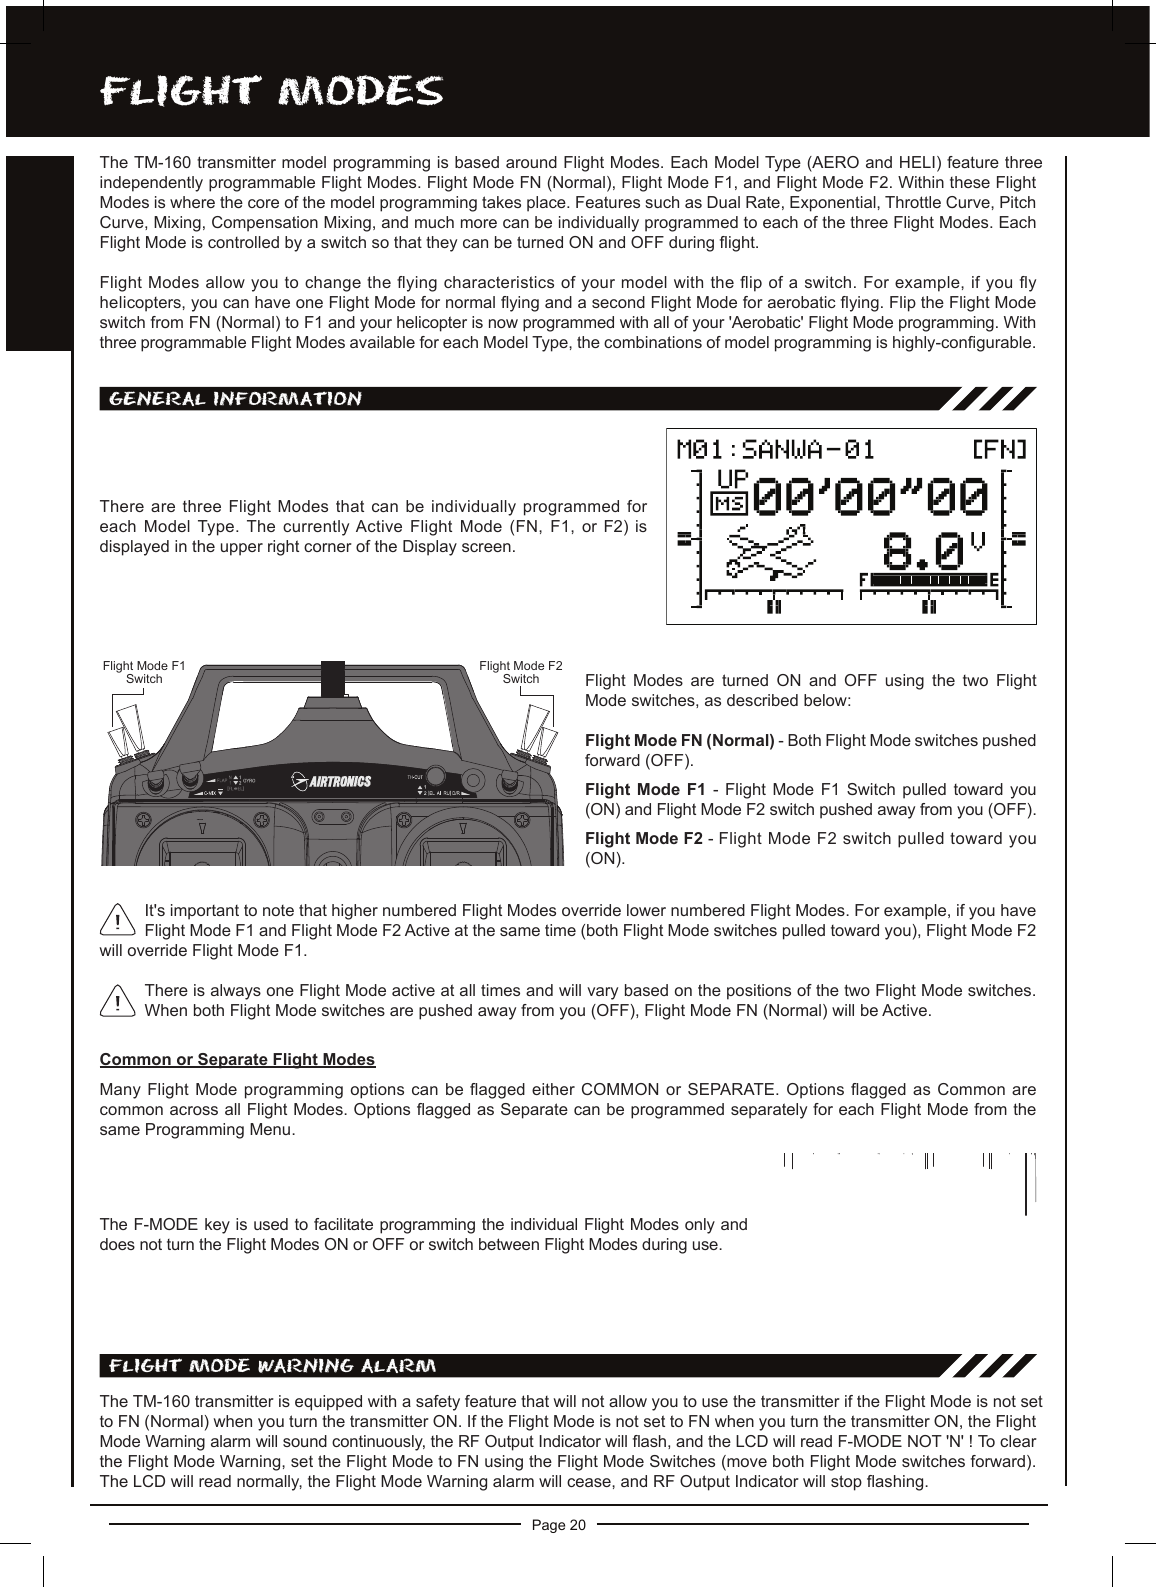 Page 20FLighT MODESThe TM-160 transmitter model programming is based around Flight Modes. Each Model Type (AERO and HELI) feature three independently programmable Flight Modes. Flight Mode FN (Normal), Flight Mode F1, and Flight Mode F2. Within these Flight Modes is where the core of the model programming takes place. Features such as Dual Rate, Exponential, Throttle Curve, Pitch Curve, Mixing, Compensation Mixing, and much more can be individually programmed to each of the three Flight Modes. Each Flight Mode is controlled by a switch so that they can be turned ON and OFF during ight.Flight Modes allow you to change the ying characteristics of your model with the ip of a switch. For example, if you y helicopters, you can have one Flight Mode for normal ying and a second Flight Mode for aerobatic ying. Flip the Flight Mode switch from FN (Normal) to F1 and your helicopter is now programmed with all of your &apos;Aerobatic&apos; Flight Mode programming. With three programmable Flight Modes available for each Model Type, the combinations of model programming is highly-congurable.FLighT MODE waRning aLaRMThe TM-160 transmitter is equipped with a safety feature that will not allow you to use the transmitter if the Flight Mode is not set to FN (Normal) when you turn the transmitter ON. If the Flight Mode is not set to FN when you turn the transmitter ON, the Flight Mode Warning alarm will sound continuously, the RF Output Indicator will ash, and the LCD will read F-MODE NOT &apos;N&apos; ! To clear the Flight Mode Warning, set the Flight Mode to FN using the Flight Mode Switches (move both Flight Mode switches forward). The LCD will read normally, the Flight Mode Warning alarm will cease, and RF Output Indicator will stop ashing.There are three Flight Modes that can be individually programmed for each Model Type. The currently Active Flight Mode (FN, F1, or F2) is displayed in the upper right corner of the Display screen.There is always one Flight Mode active at all times and will vary based on the positions of the two Flight Mode switches. When both Flight Mode switches are pushed away from you (OFF), Flight Mode FN (Normal) will be Active.gEnERaL inFORMaTiOnThe F-MODE key is used to facilitate programming the individual Flight Modes only and does not turn the Flight Modes ON or OFF or switch between Flight Modes during use.It&apos;s important to note that higher numbered Flight Modes override lower numbered Flight Modes. For example, if you have Flight Mode F1 and Flight Mode F2 Active at the same time (both Flight Mode switches pulled toward you), Flight Mode F2 will override Flight Mode F1.Common or Separate Flight ModesMany Flight Mode programming options can be agged either COMMON or SEPARATE. Options agged as Common are common across all Flight Modes. Options agged as Separate can be programmed separately for each Flight Mode from the same Programming Menu.Flight  Modes  are  turned  ON  and  OFF  using  the  two  Flight Mode switches, as described below:Flight Mode FN (Normal) - Both Flight Mode switches pushed forward (OFF).Flight  Mode  F1 -  Flight Mode  F1  Switch  pulled toward  you (ON) and Flight Mode F2 switch pushed away from you (OFF).Flight Mode F2 - Flight Mode F2 switch pulled toward you (ON).Flight Mode F1SwitchFlight Mode F2Switch